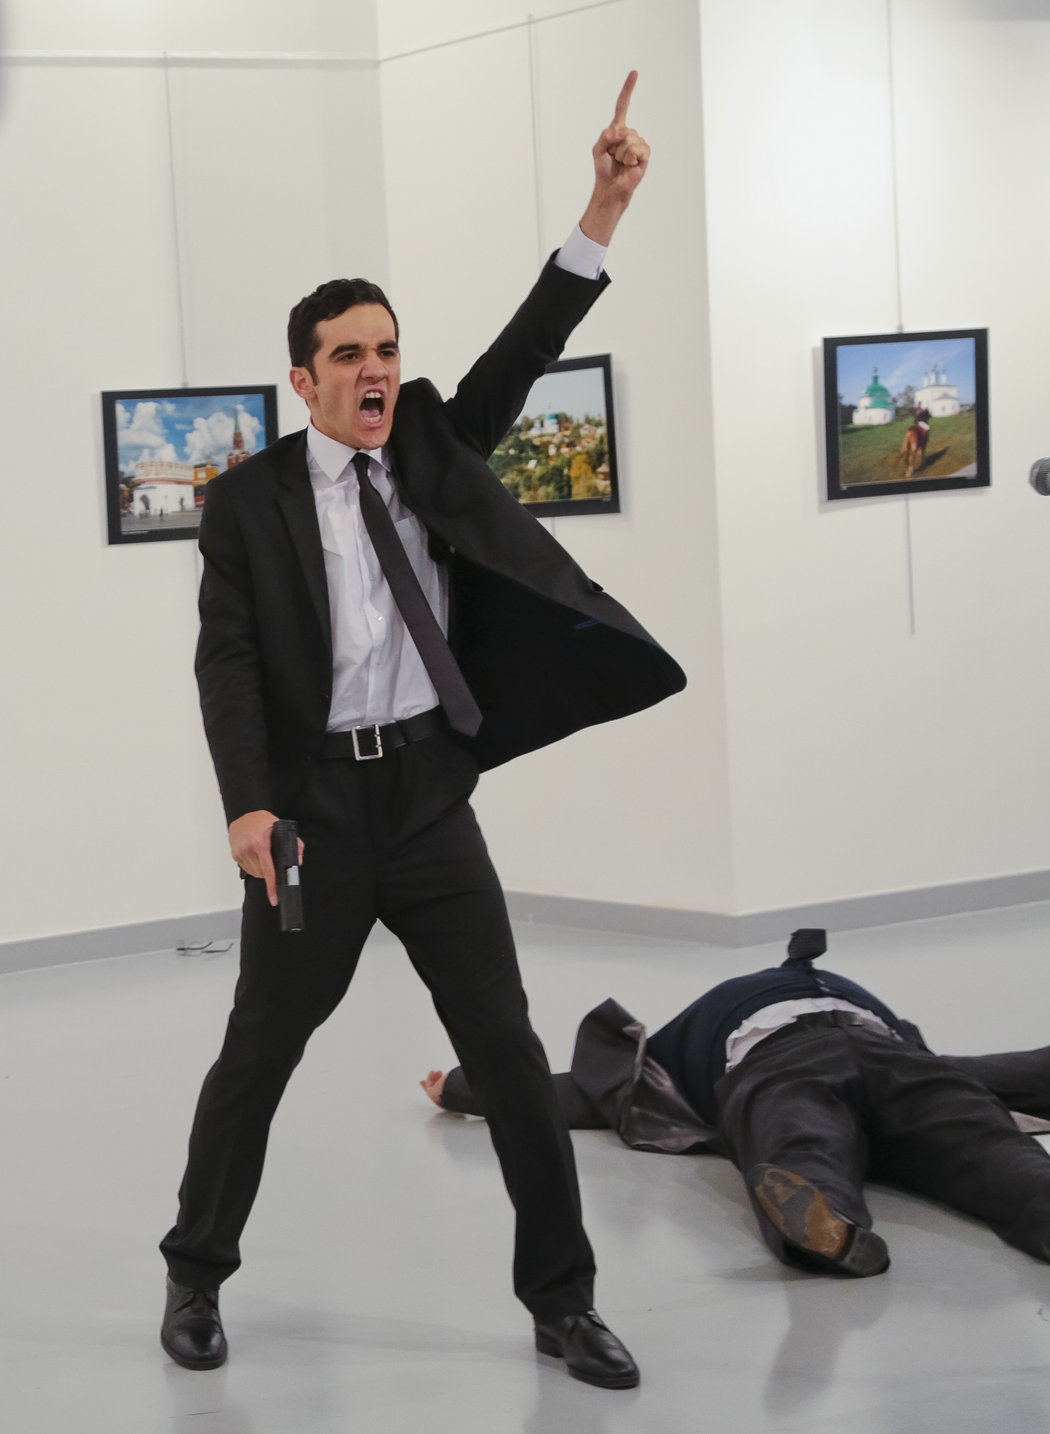 The assassination of the Russian ambassador to Turkey. Copyrighted Image. For informational use only. http://www.nytimes.com/interactive/2016/12/22/sunday-review/2016-year-in-pictures.html?_r=2 